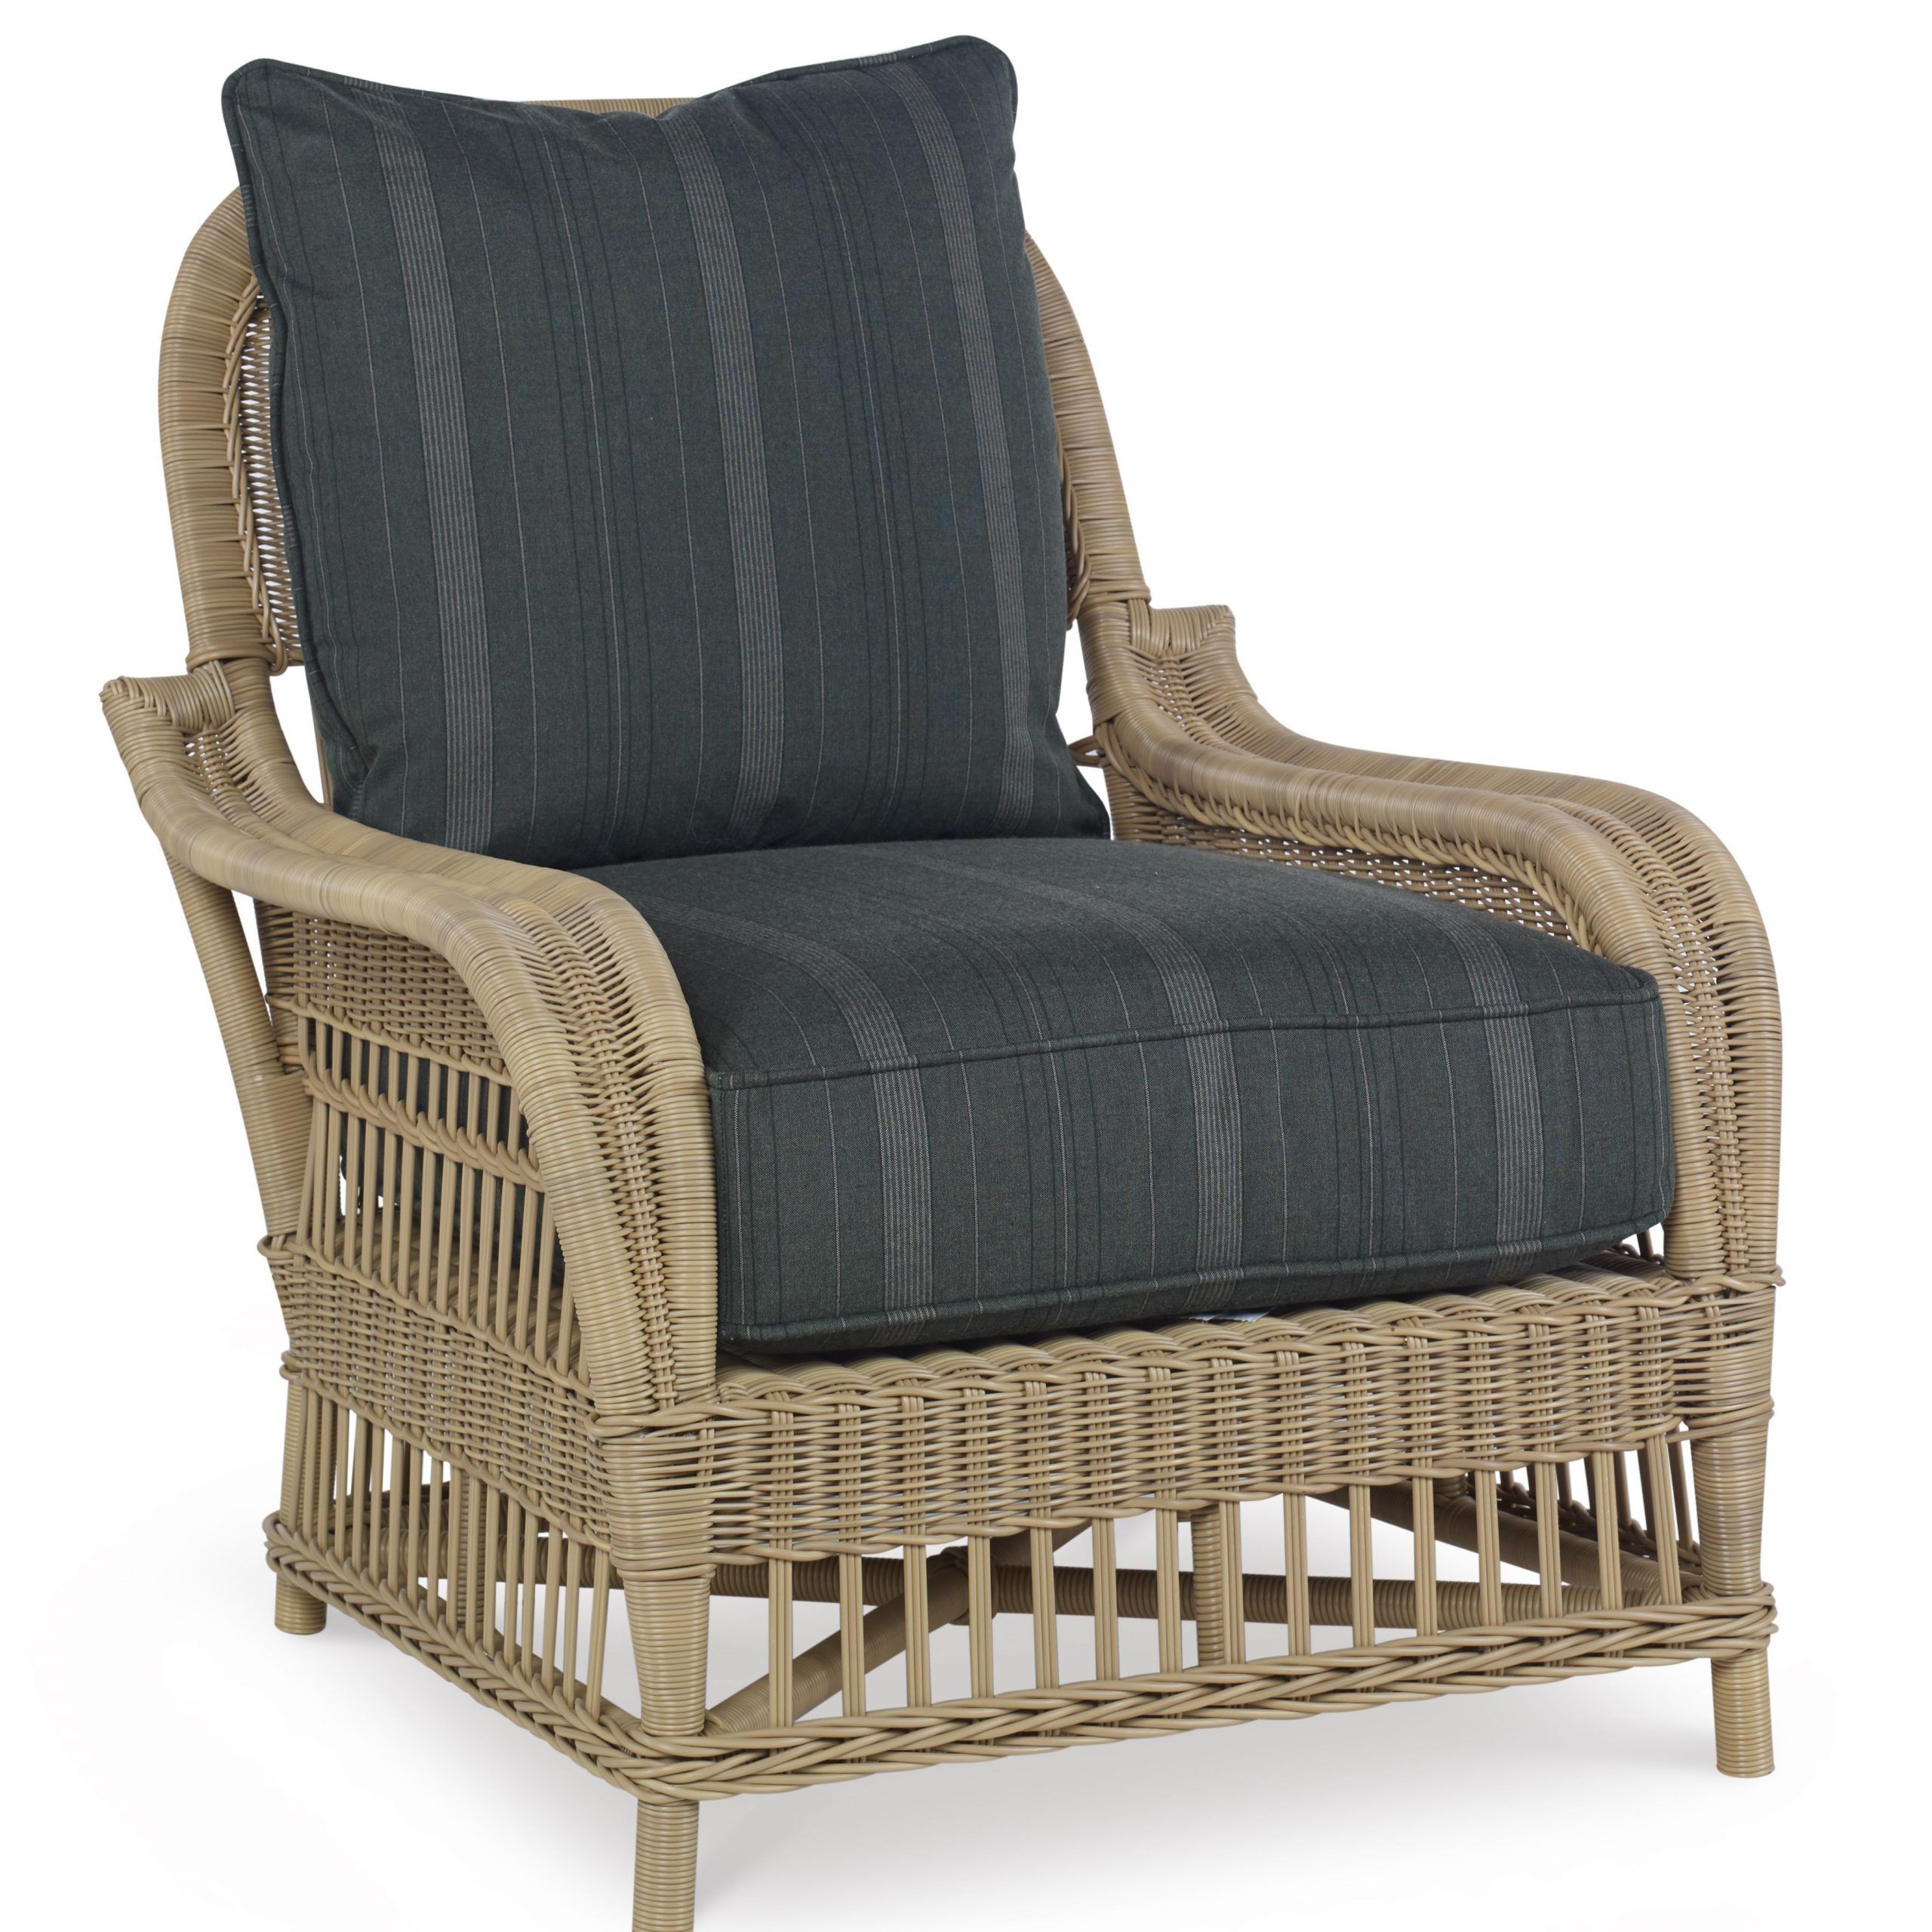 Wicker Lounge Chair, Chair, Lounge Chair In Popular Natural Wood Outdoor Lounger Chairs (View 13 of 15)